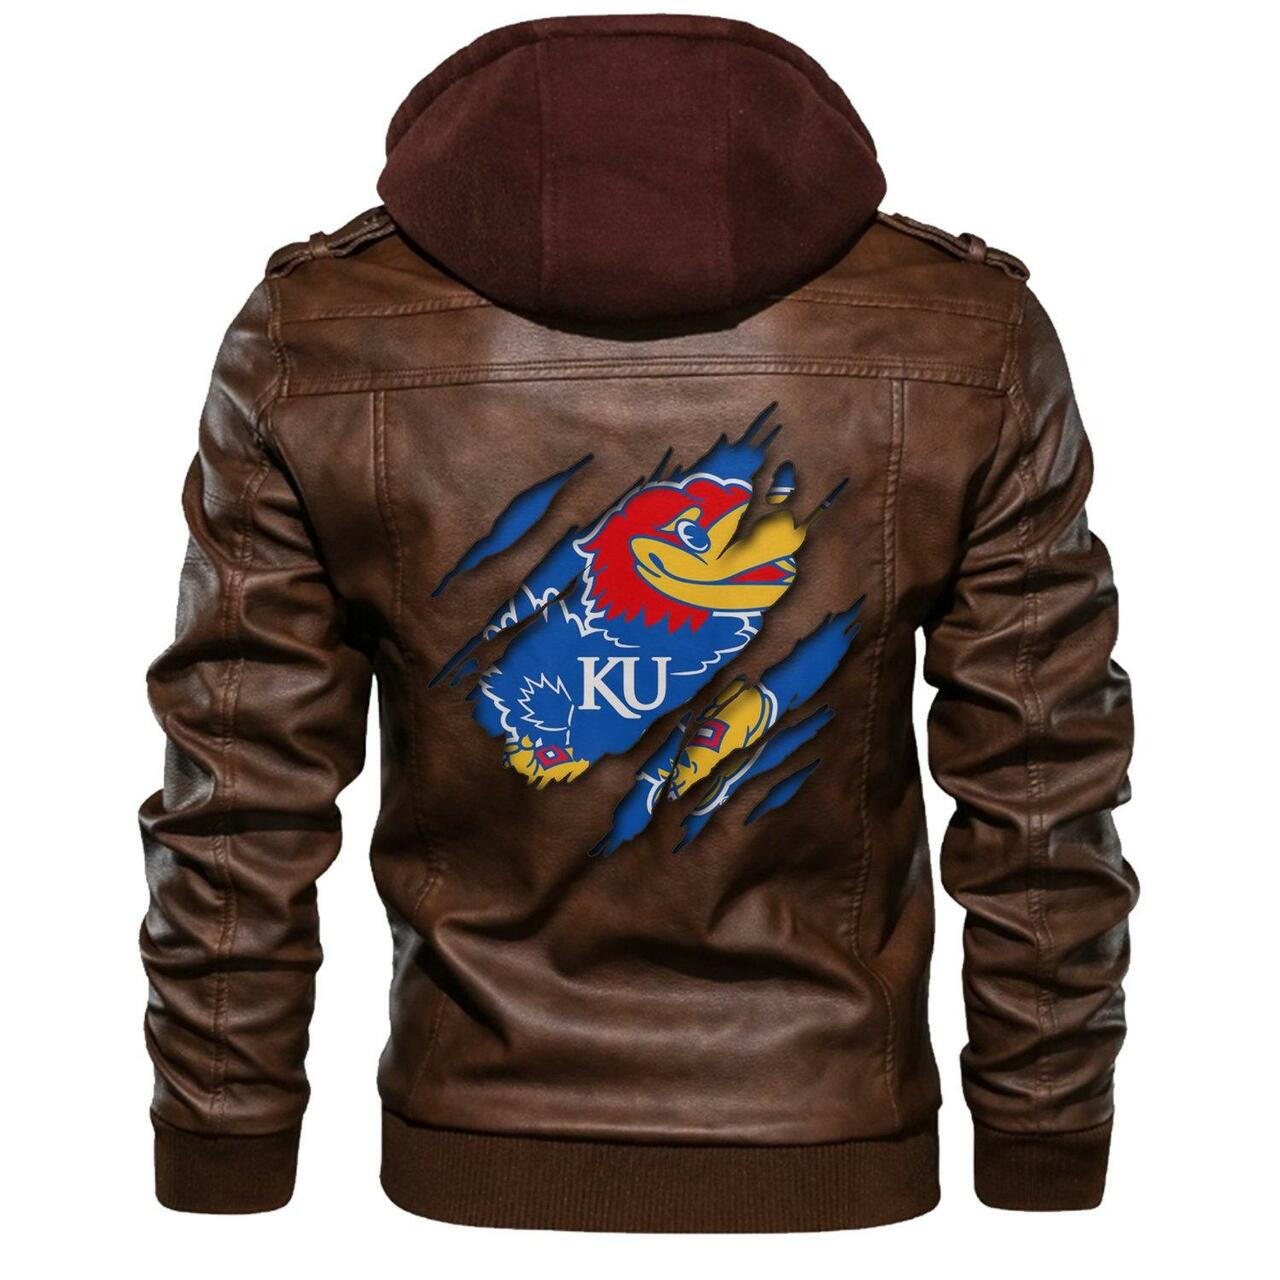 Top 200+ leather jacket so cool for your man 307